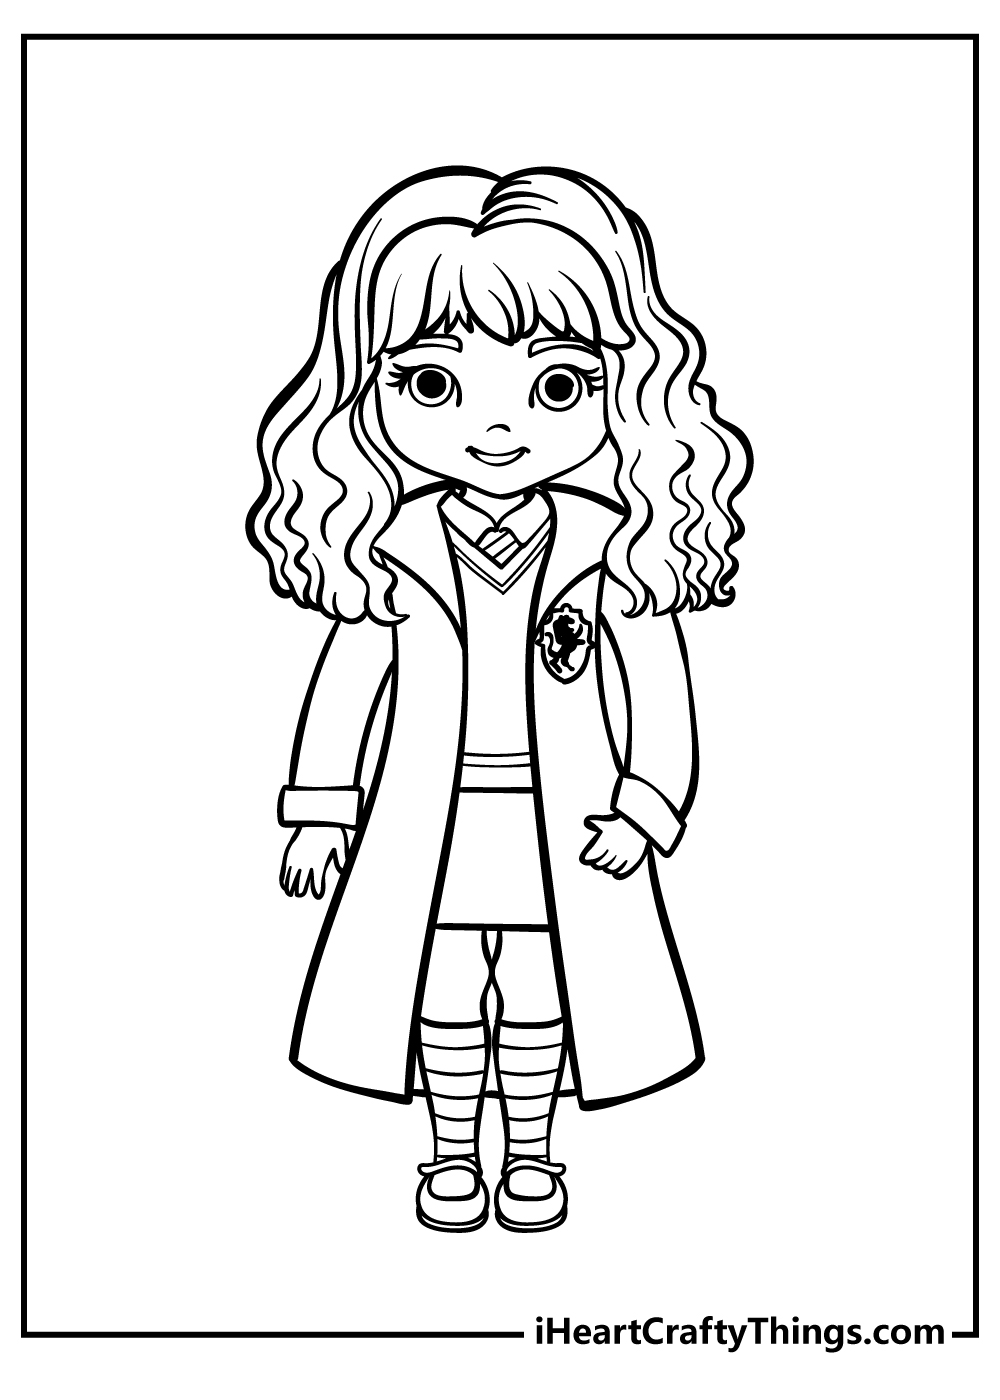 Harry Potter Coloring Pages for kids free download